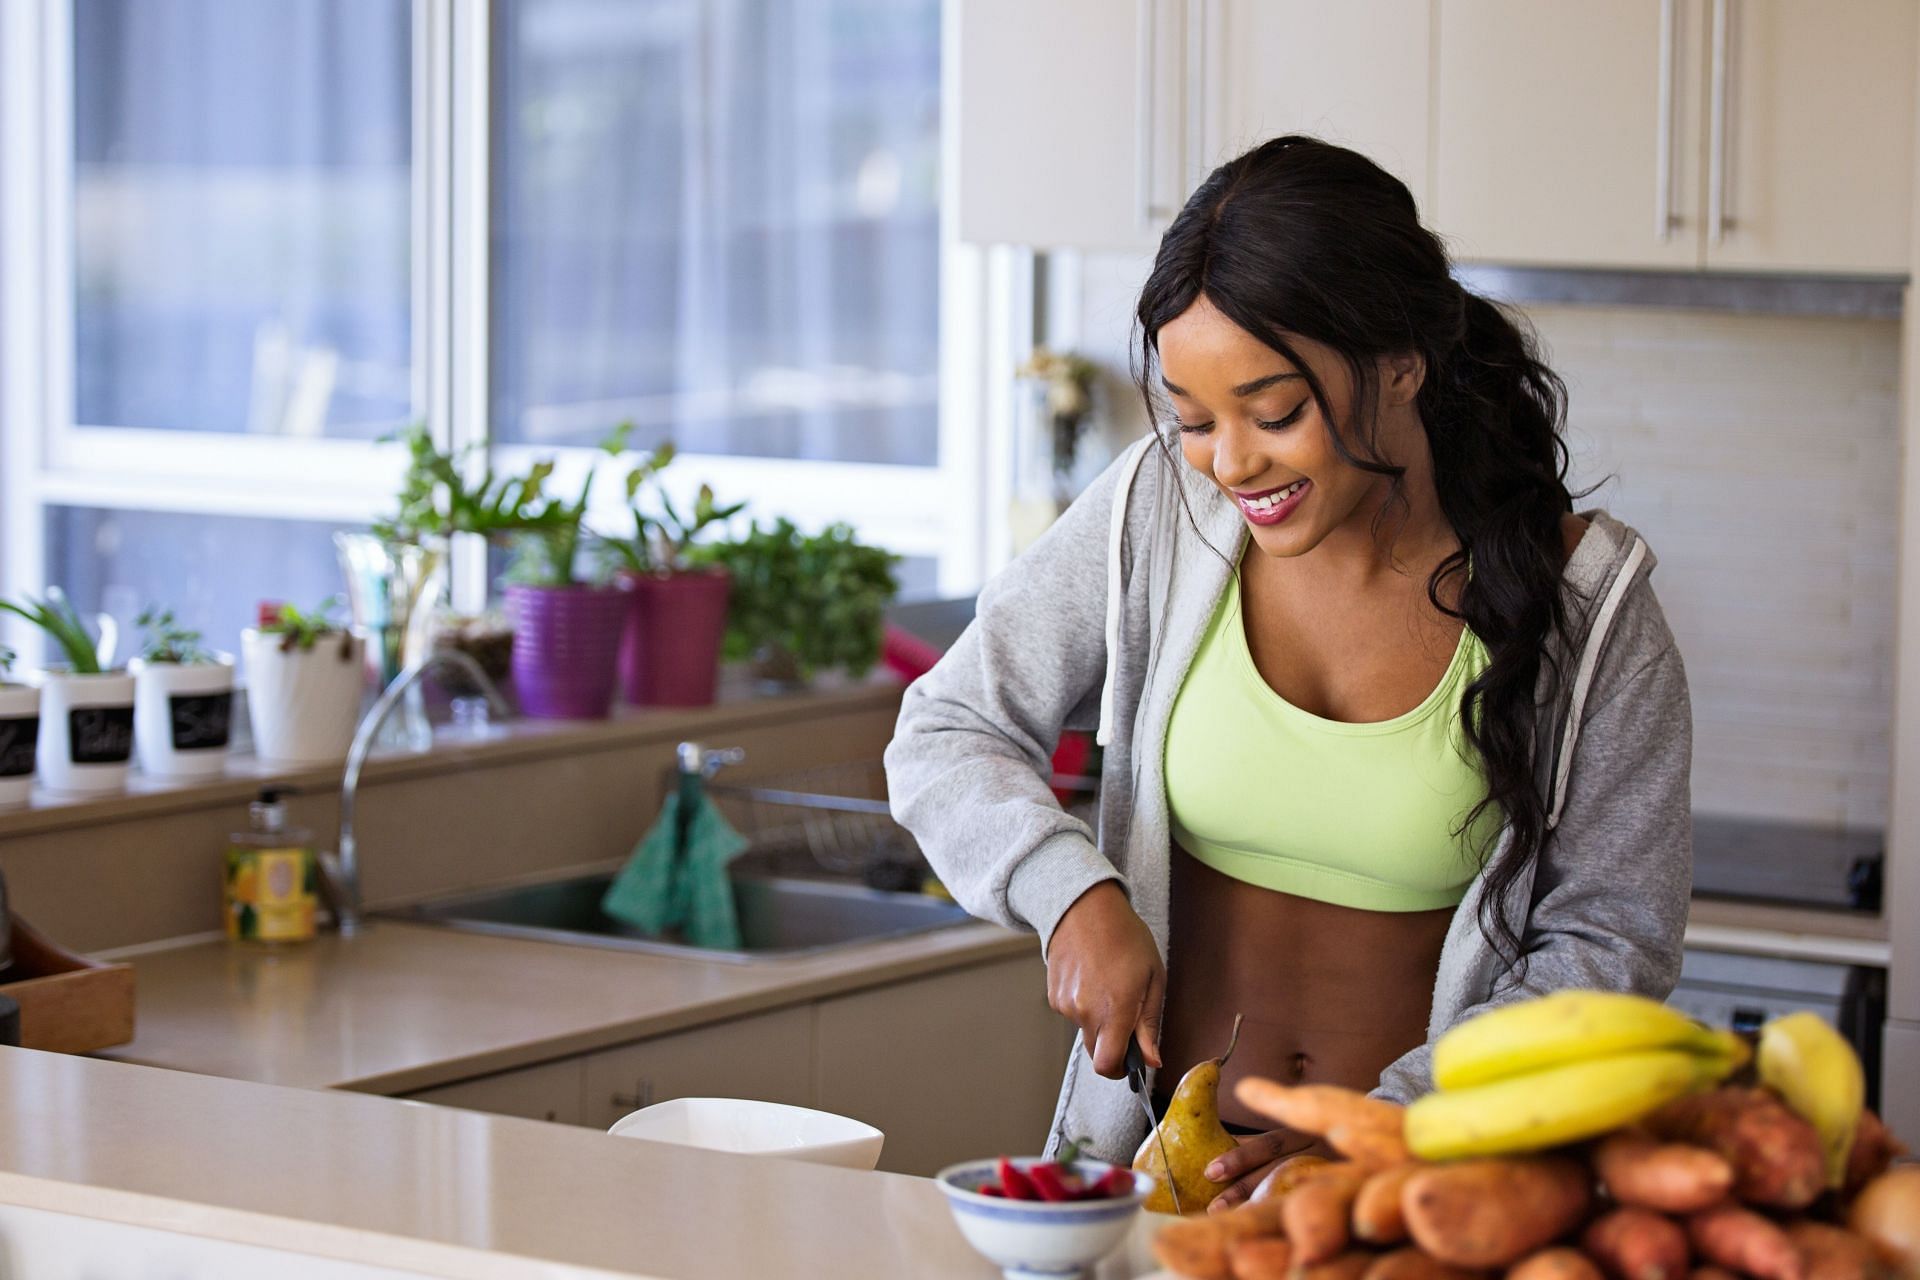 Healthy Habits To Support Weight Loss and Achieve Fitness Goals (Image via Pexels)